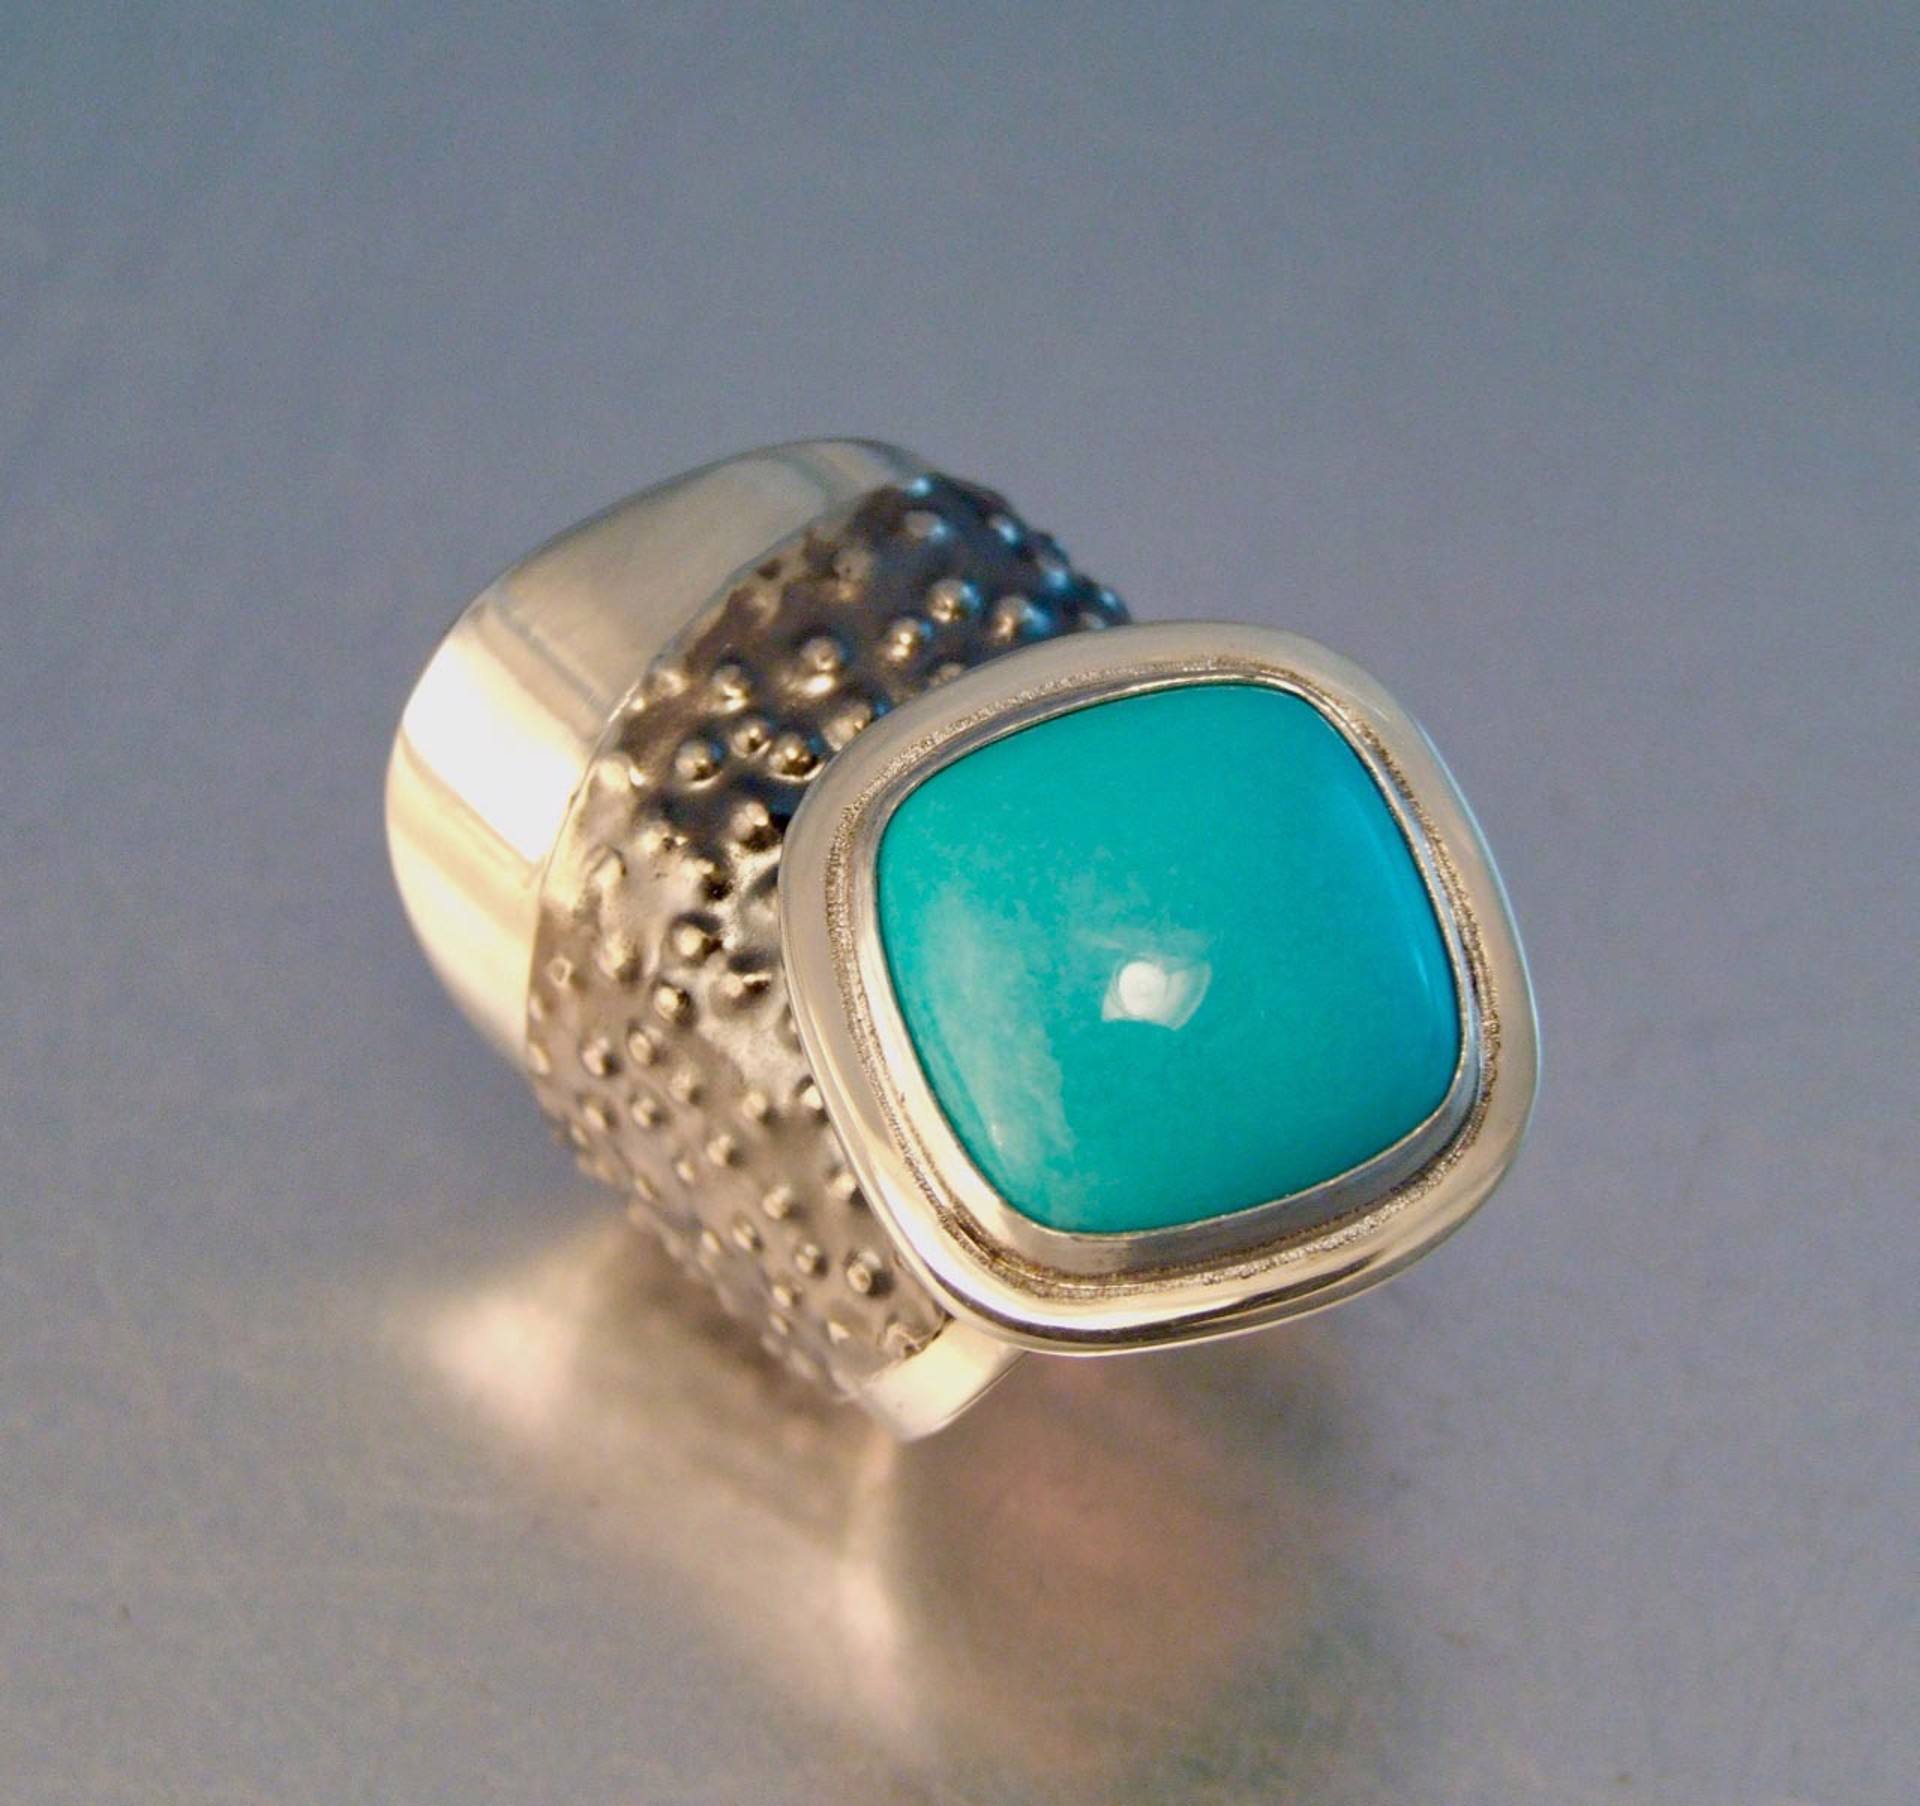 Turquoise Dermis Ring by Melody Armstrong